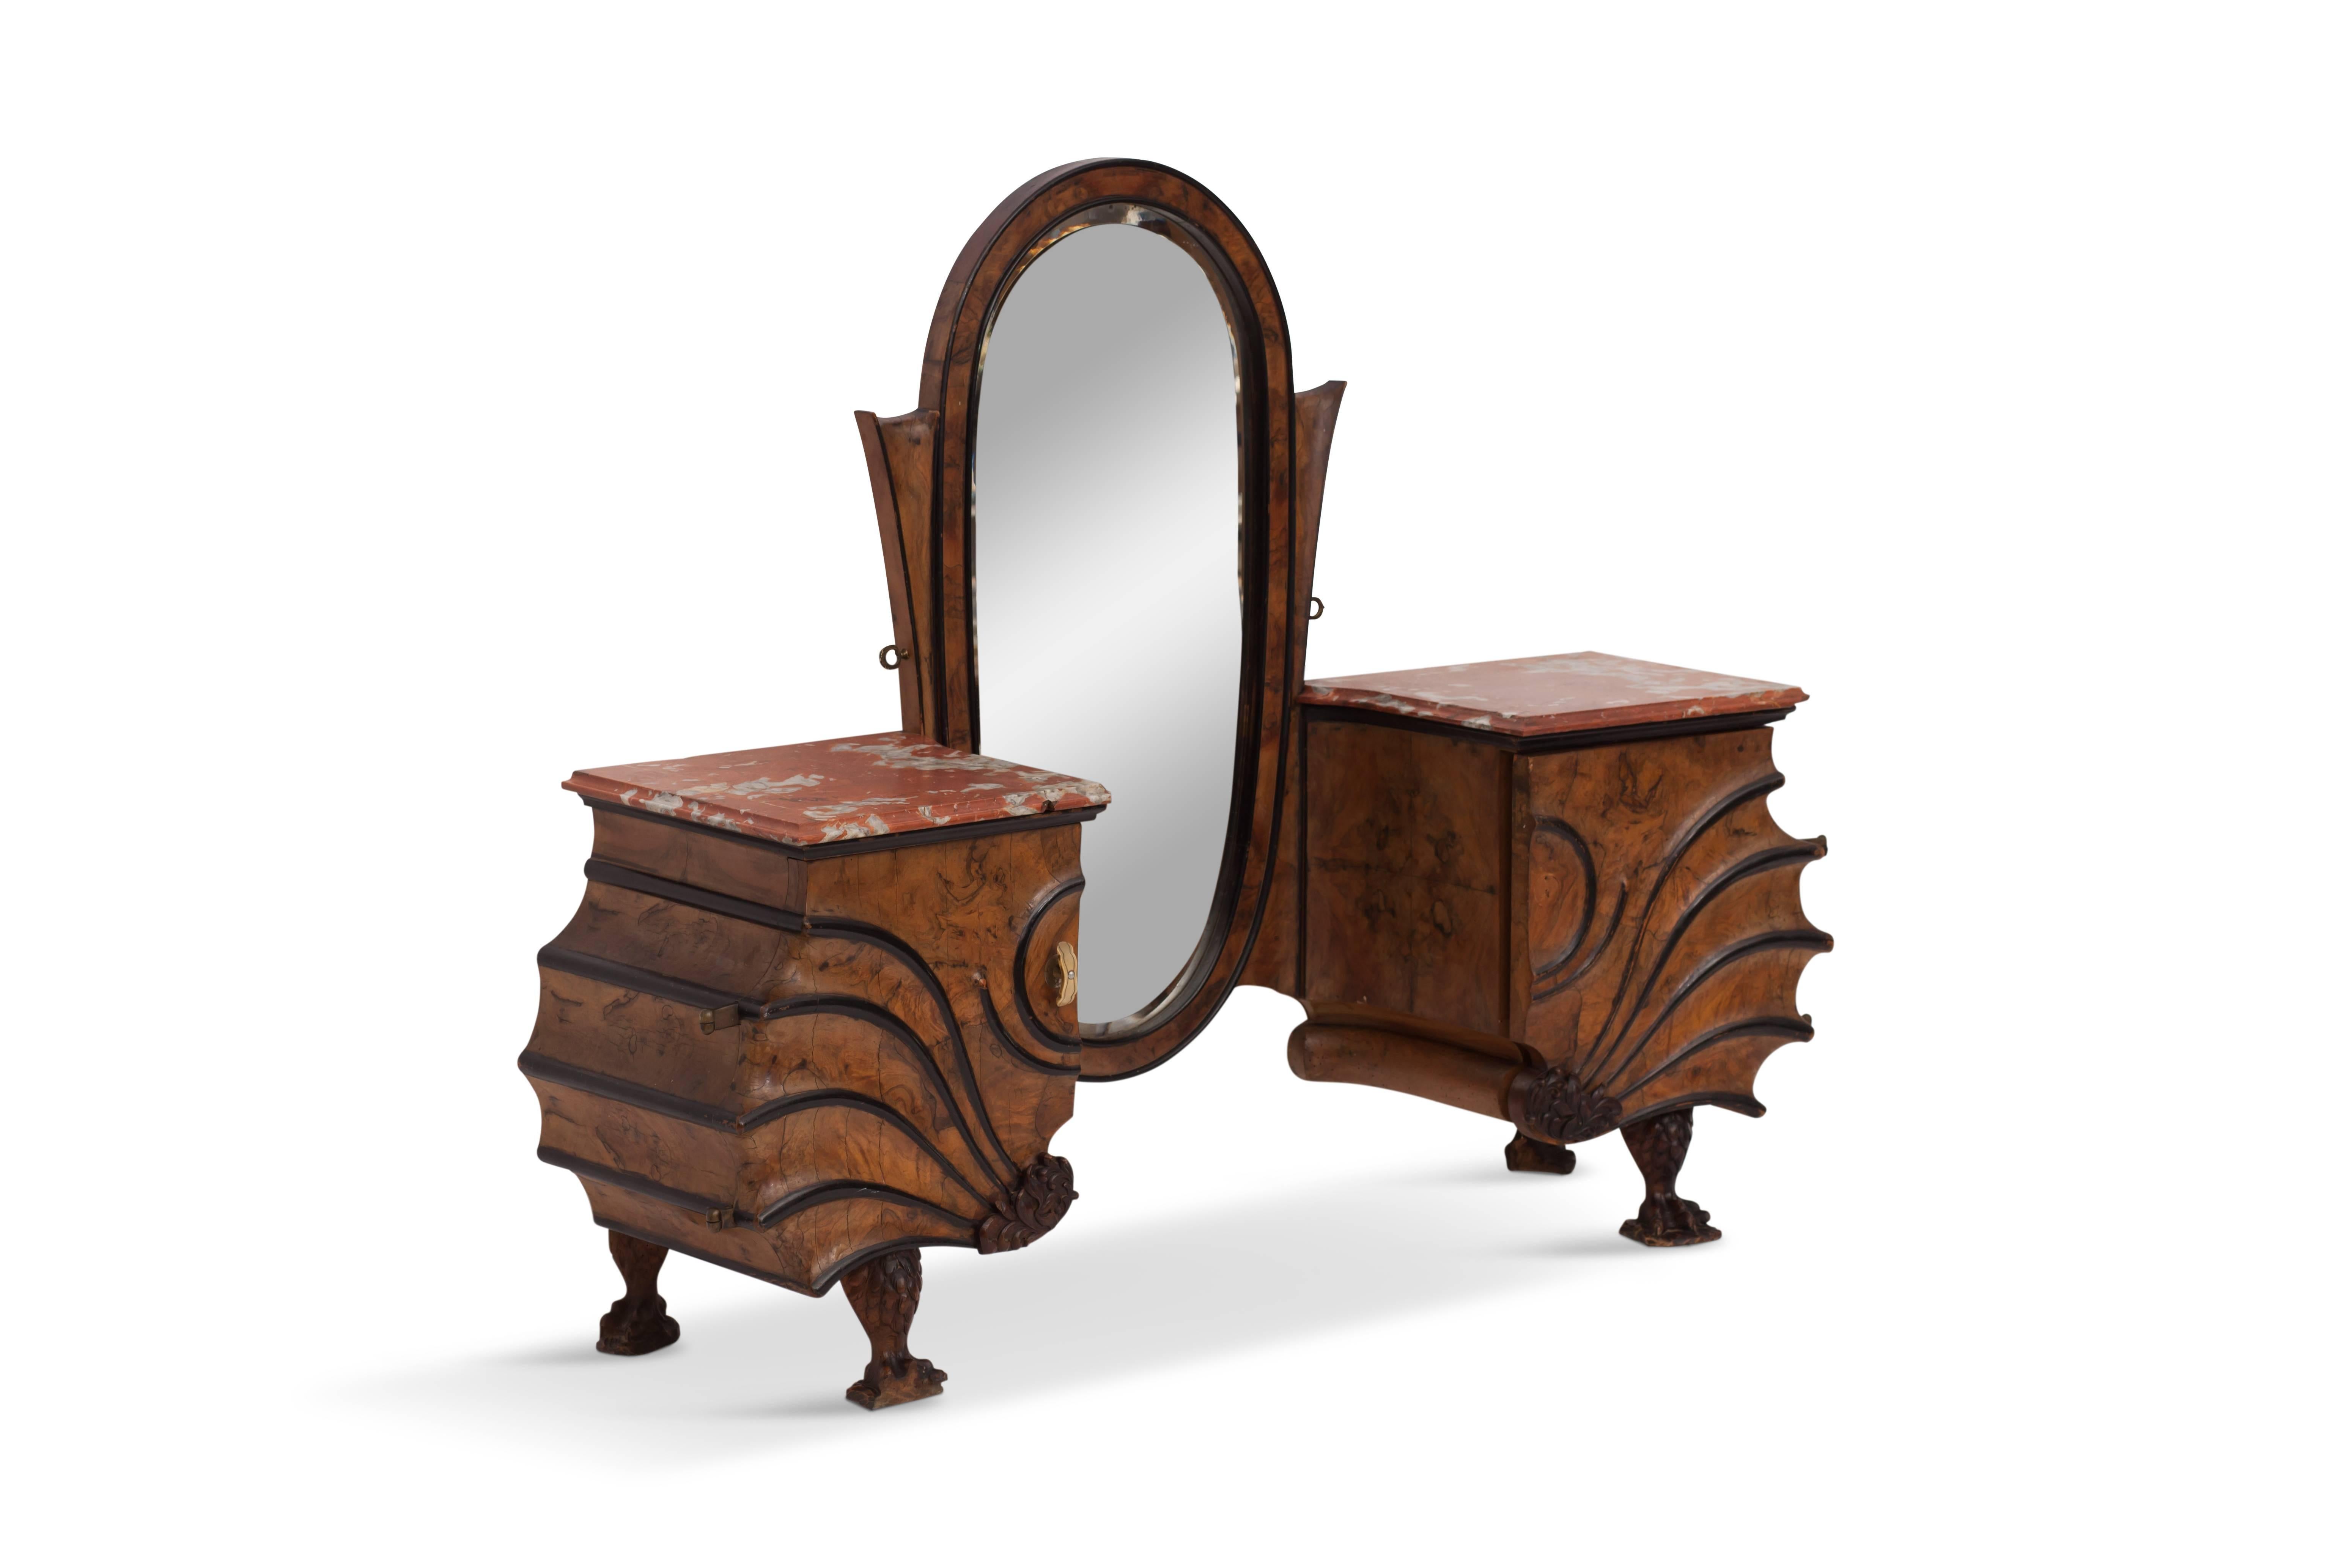 Extraordinary walnut and ebonized vanity table

The eclectic piece shows a beautiful fan shaped form
with details such as the hand-carved claw feet legs
and stunning flowed motives

The sides are provided with a red and white marmer top
very